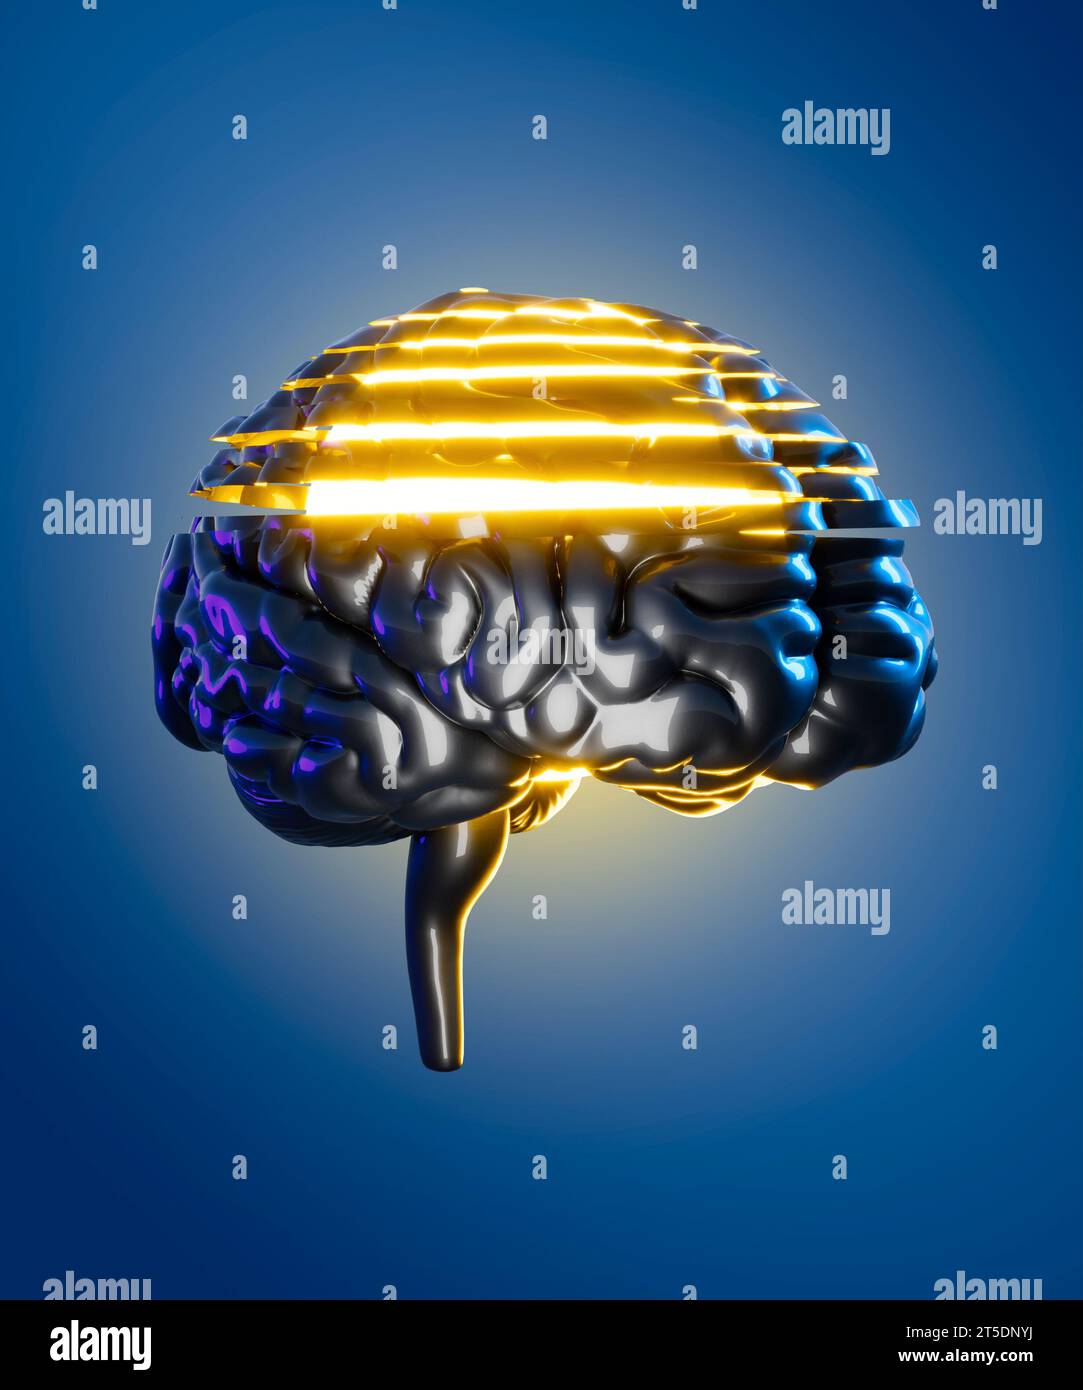 Memory lapses, forgetting things, degenerative disease. Brain problems. Parkinson and alzheimer desease. Mental health. Stroke, synapses and neurons Stock Photo